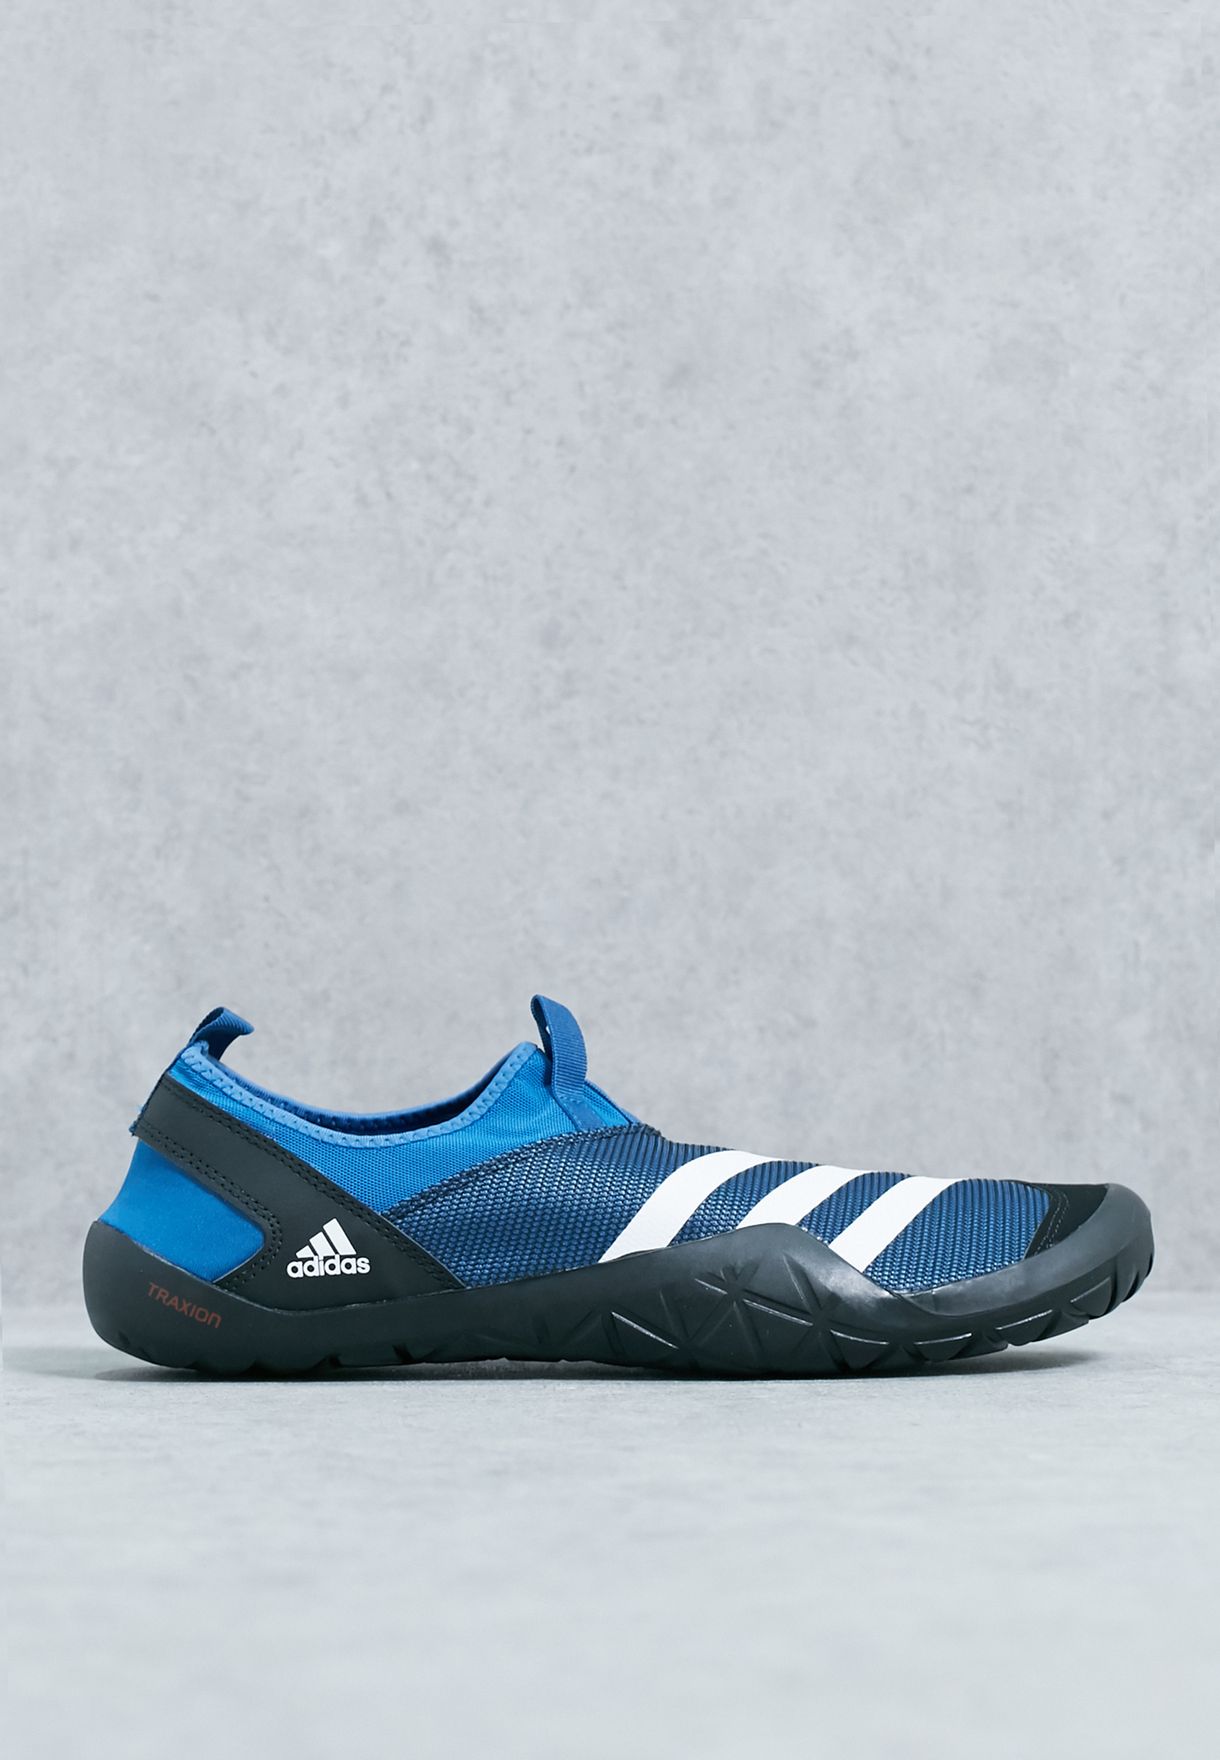 Buy Adidas Blue Climacool Jawpaw Sl for Men in Mena, Worldwide, Globally |  AD476SH46NON